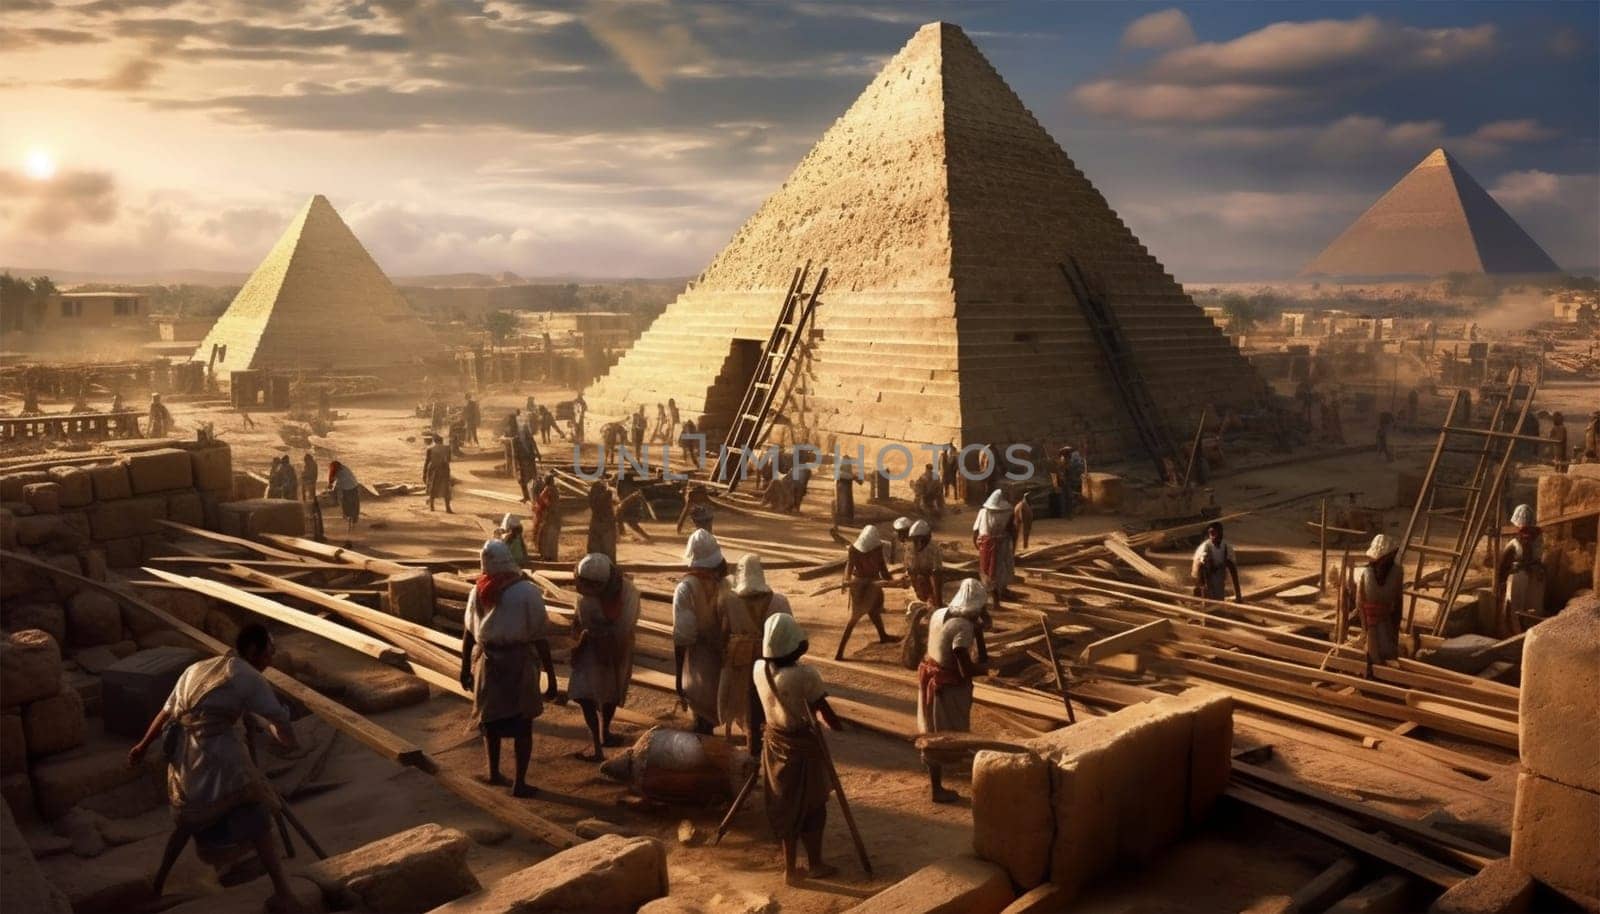 Building Pyramid in Egypt in ancient time use men to be slave the whole day,cartoon version,illustration Construction of Egyptian pyramids background